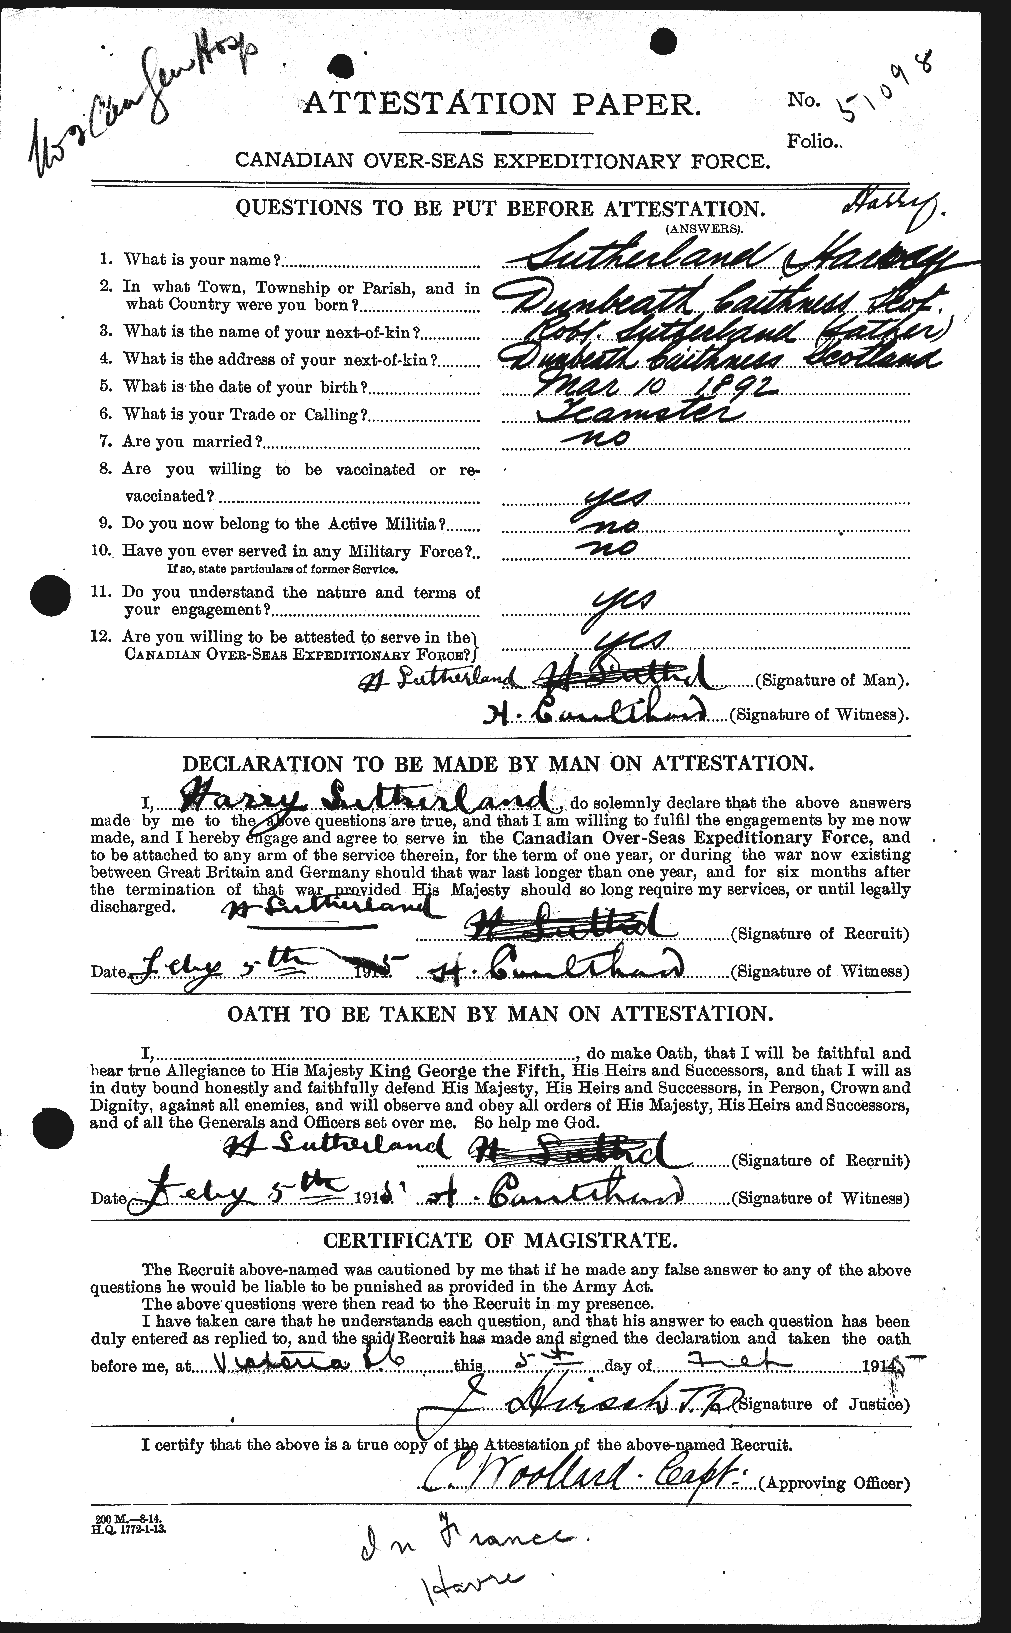 Personnel Records of the First World War - CEF 124818a